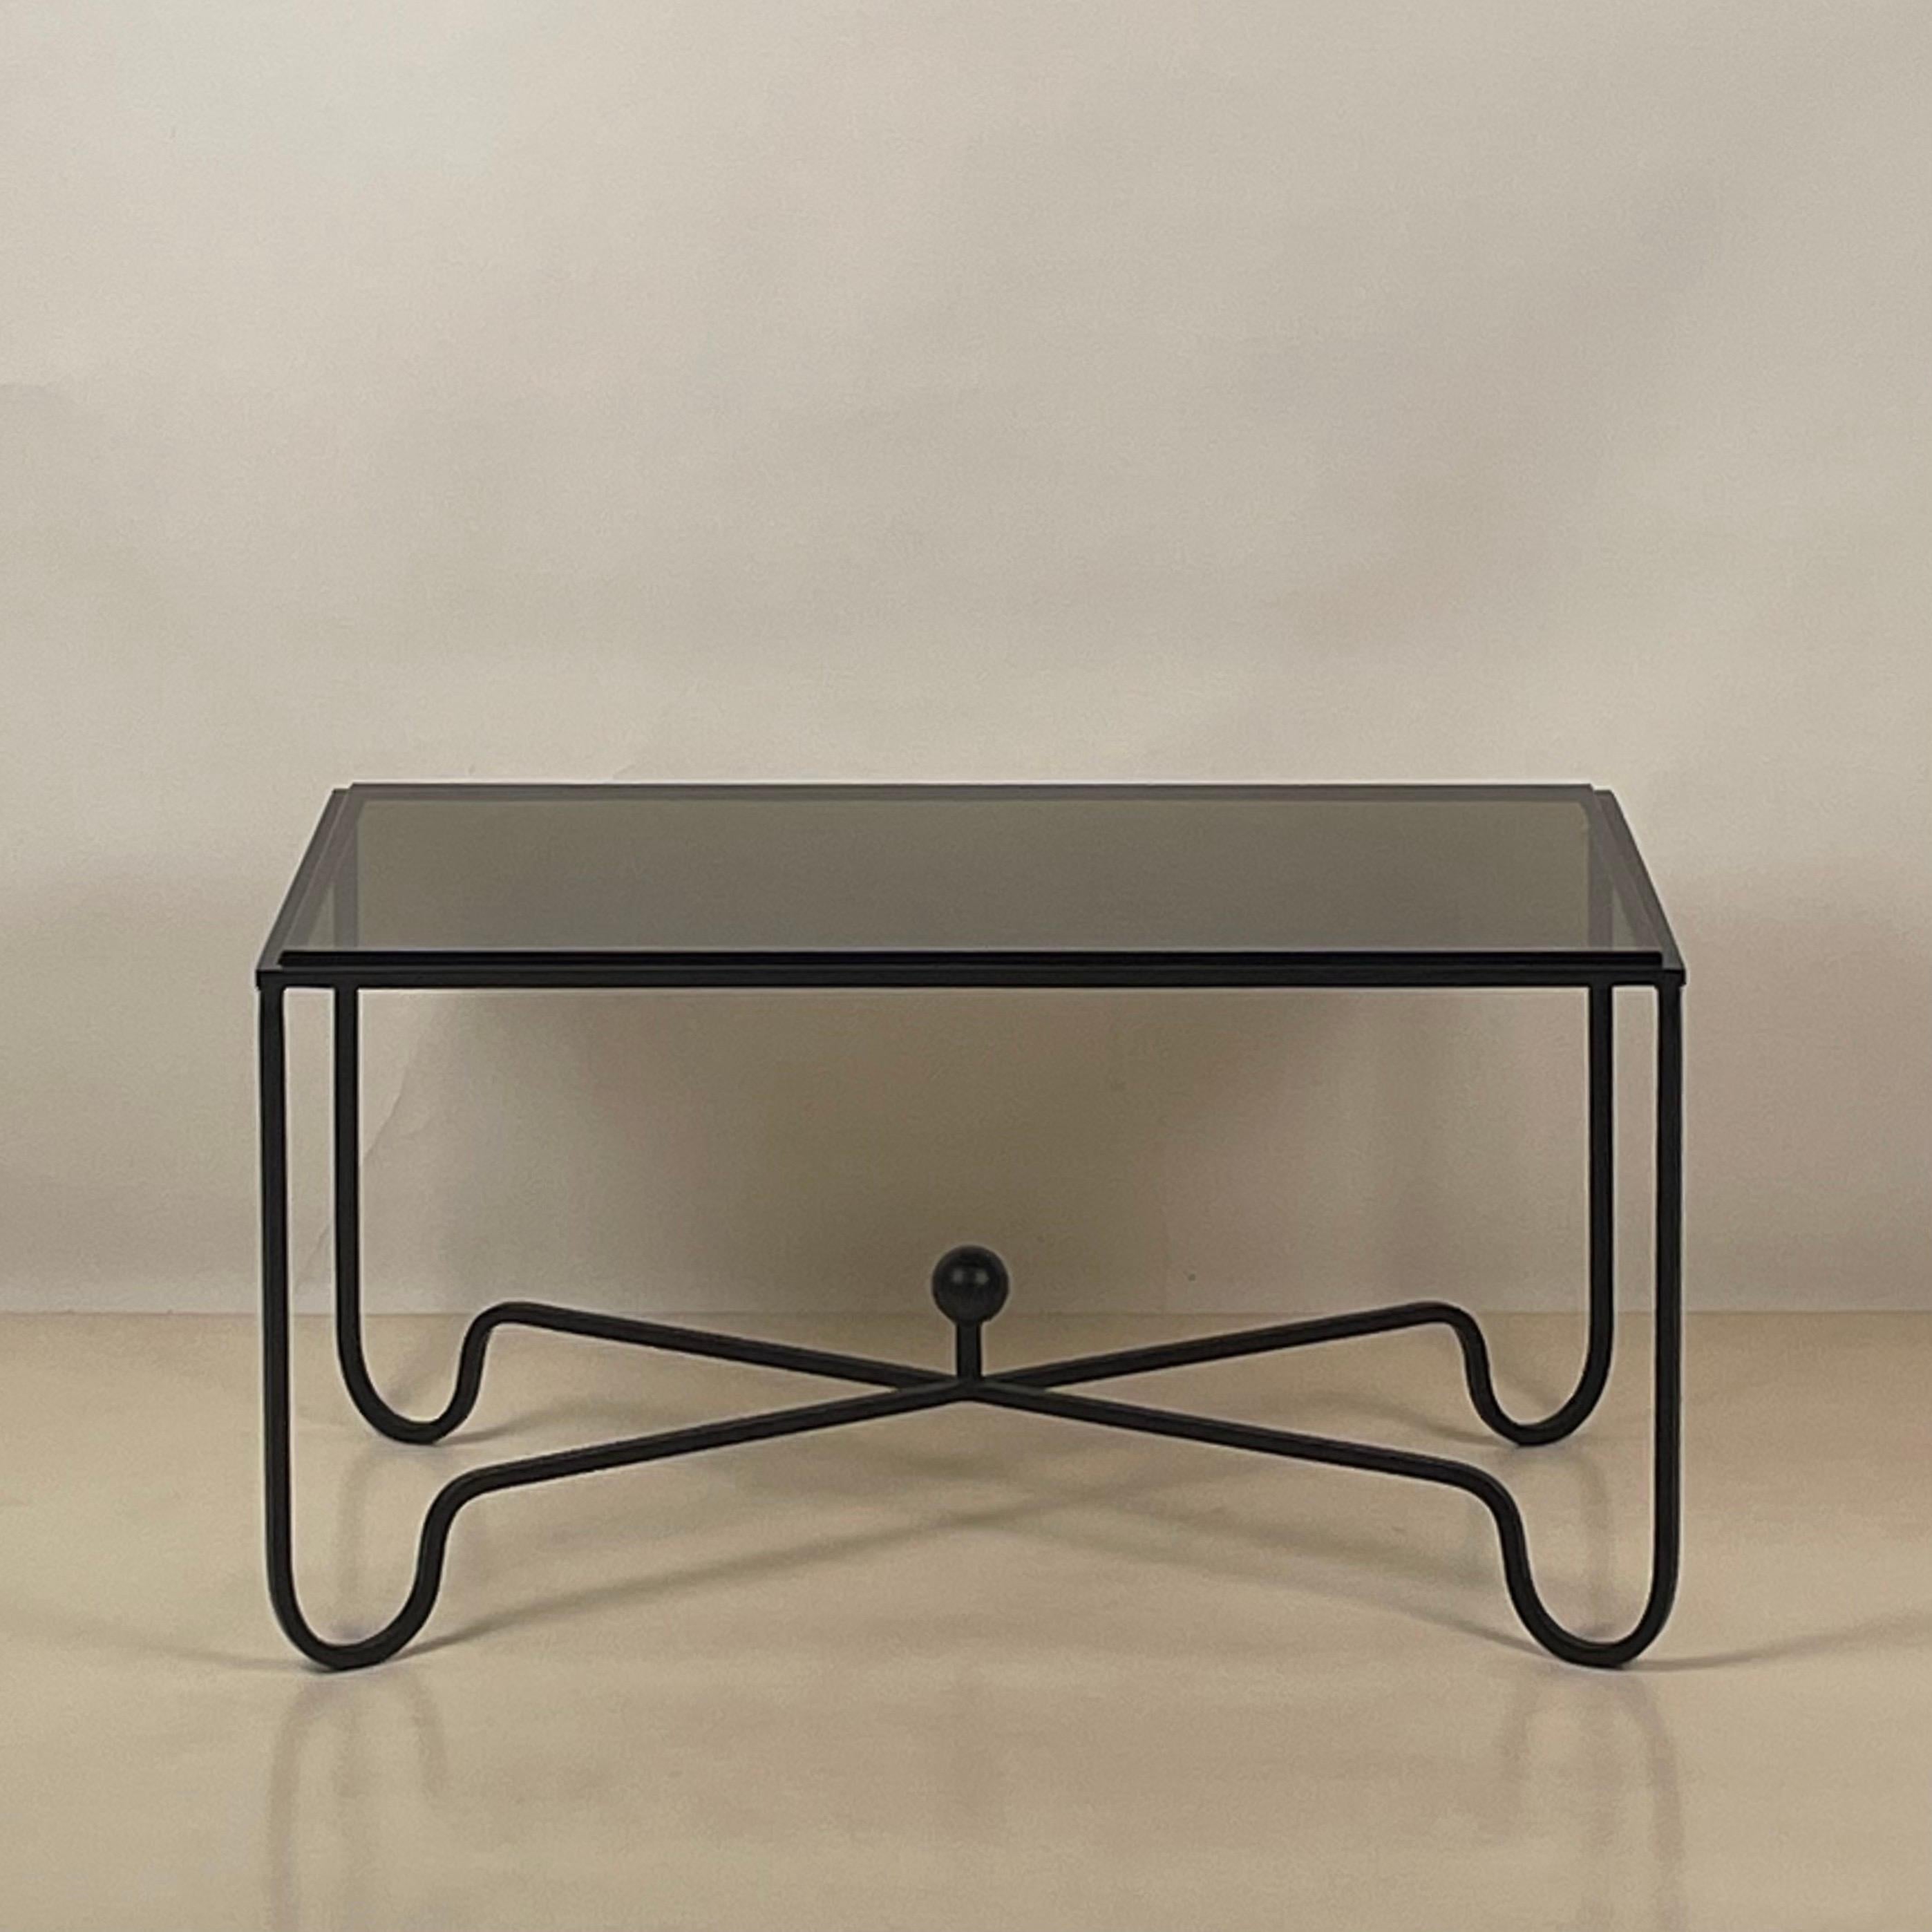 Blackened iron and smoked glass 'Entretoise' coffee table by Design Frères.

Chic and understated.